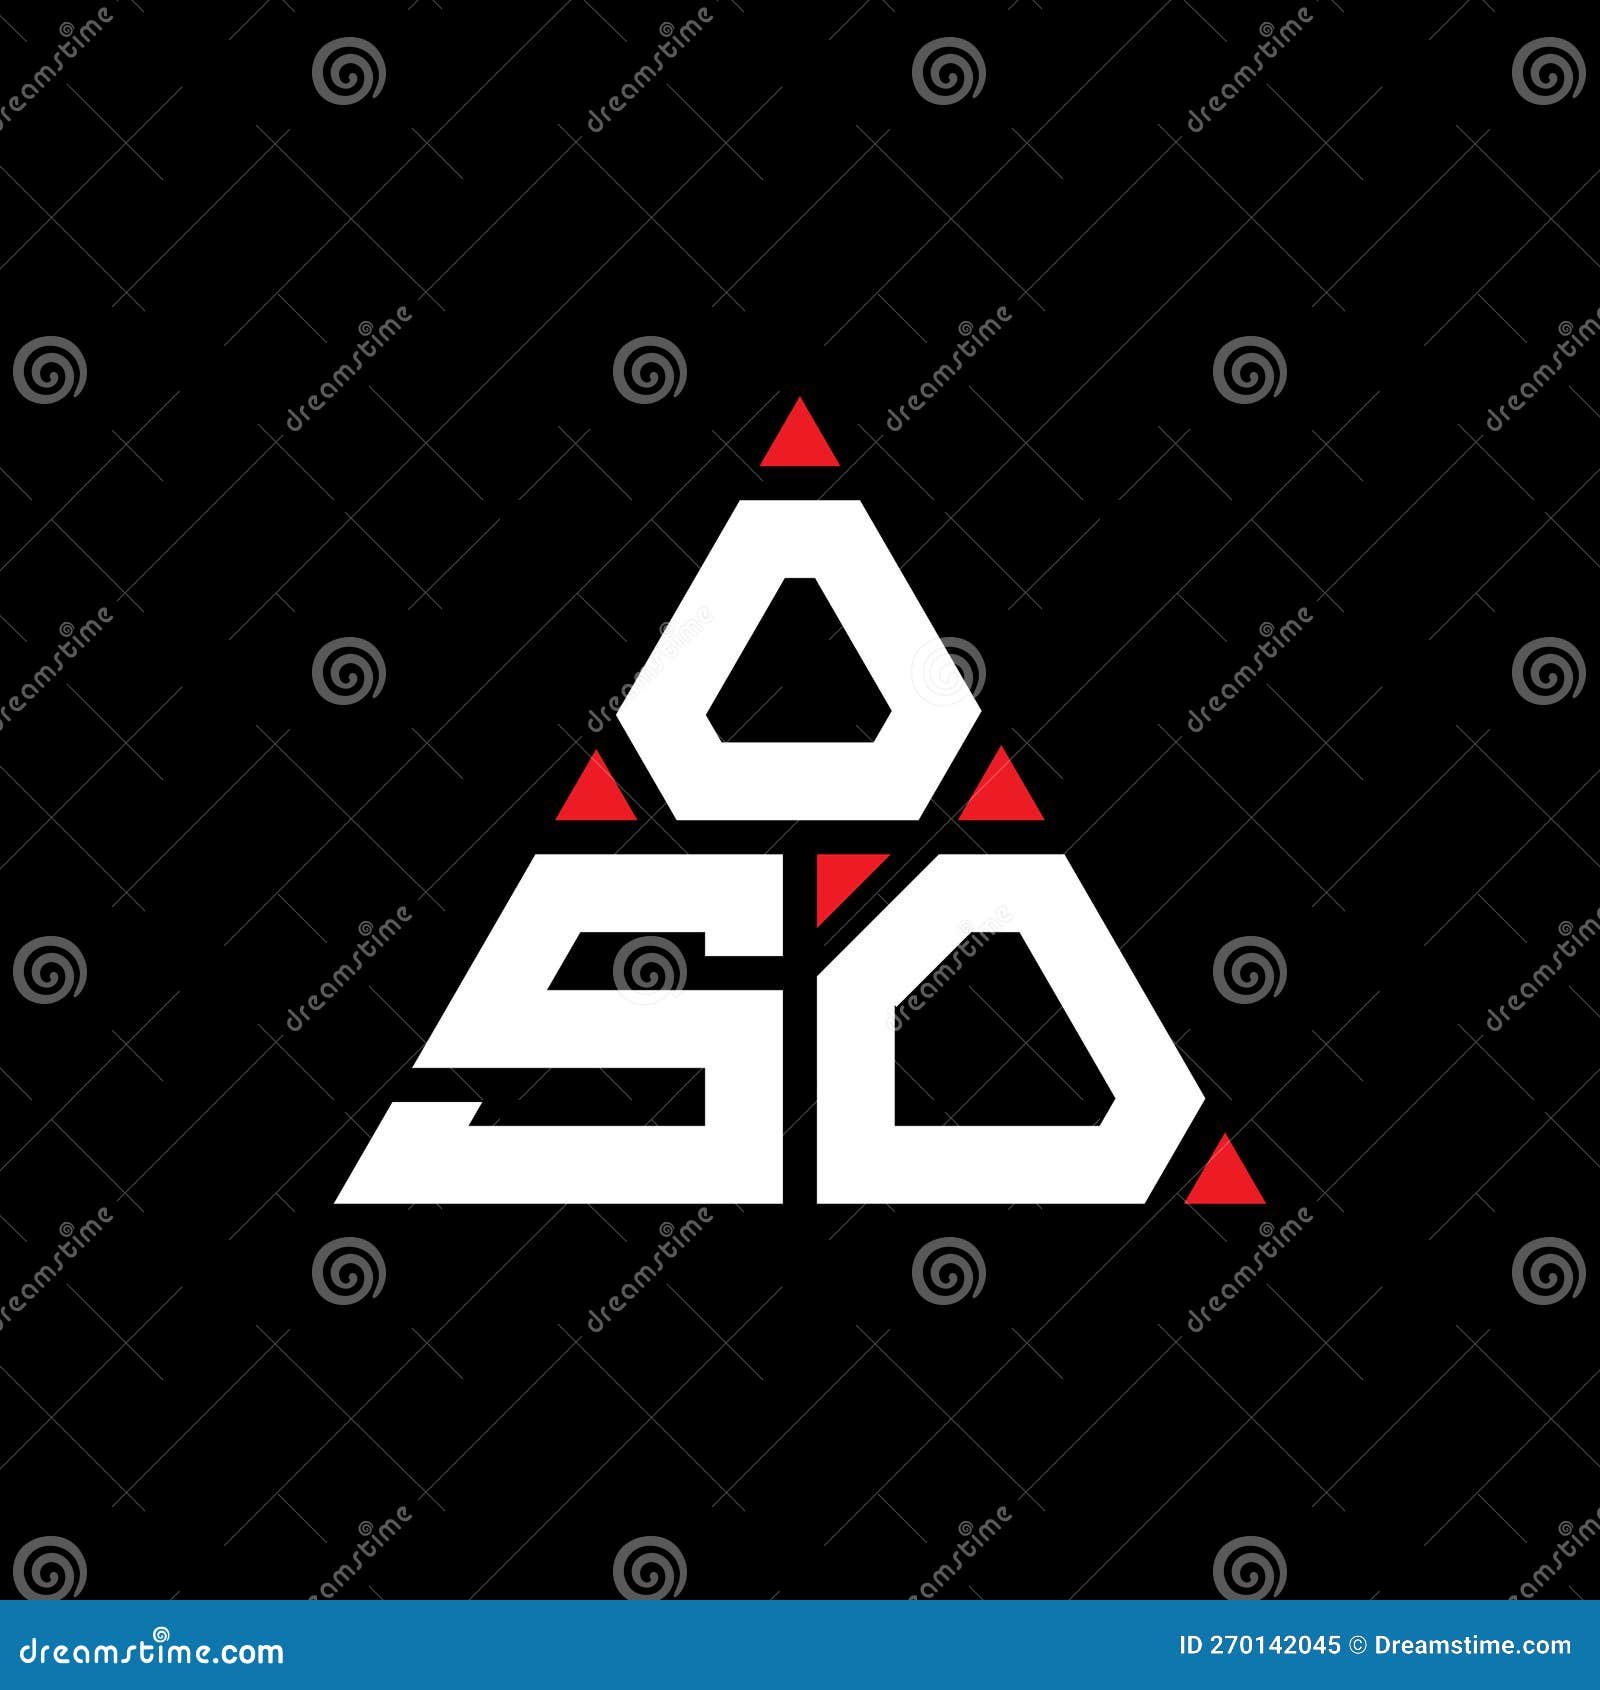 oso triangle letter logo  with triangle . oso triangle logo  monogram. oso triangle  logo template with red